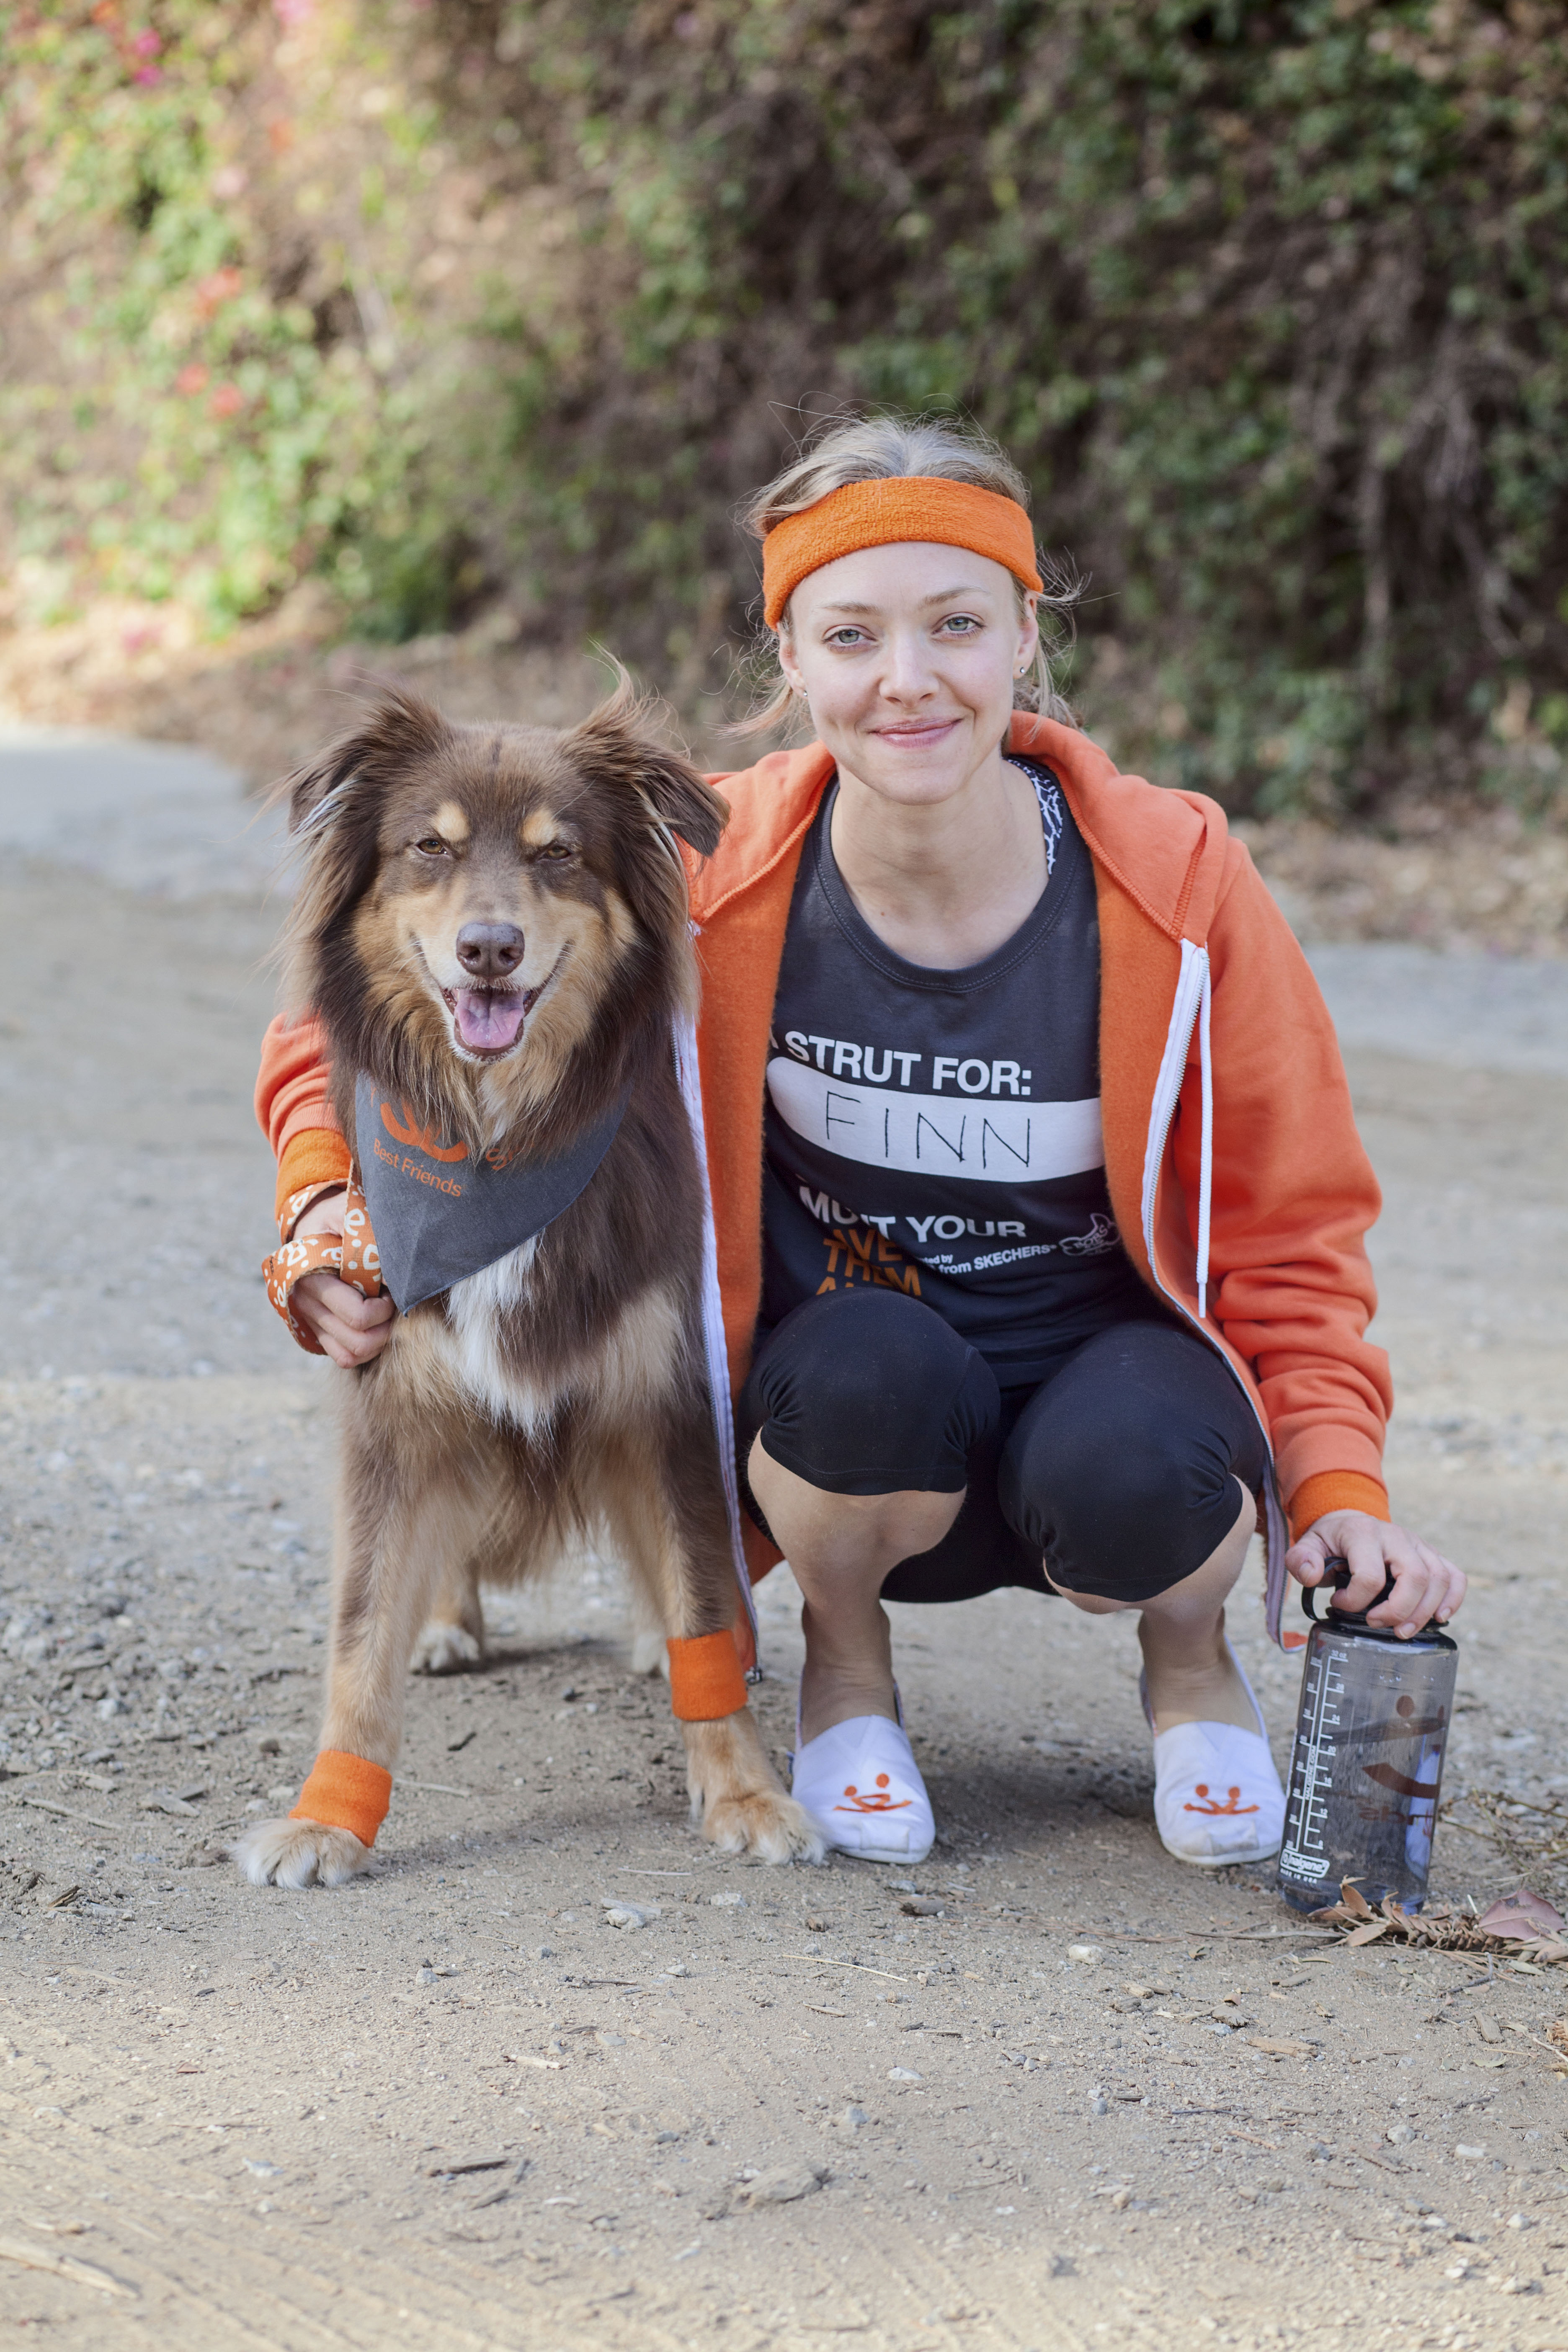 Best Friends Animal Society excited to be partnering with Amanda Seyfried and Finn to spread the word about this year’s Strut Your Mutt events, presented by BOBS from Skechers.